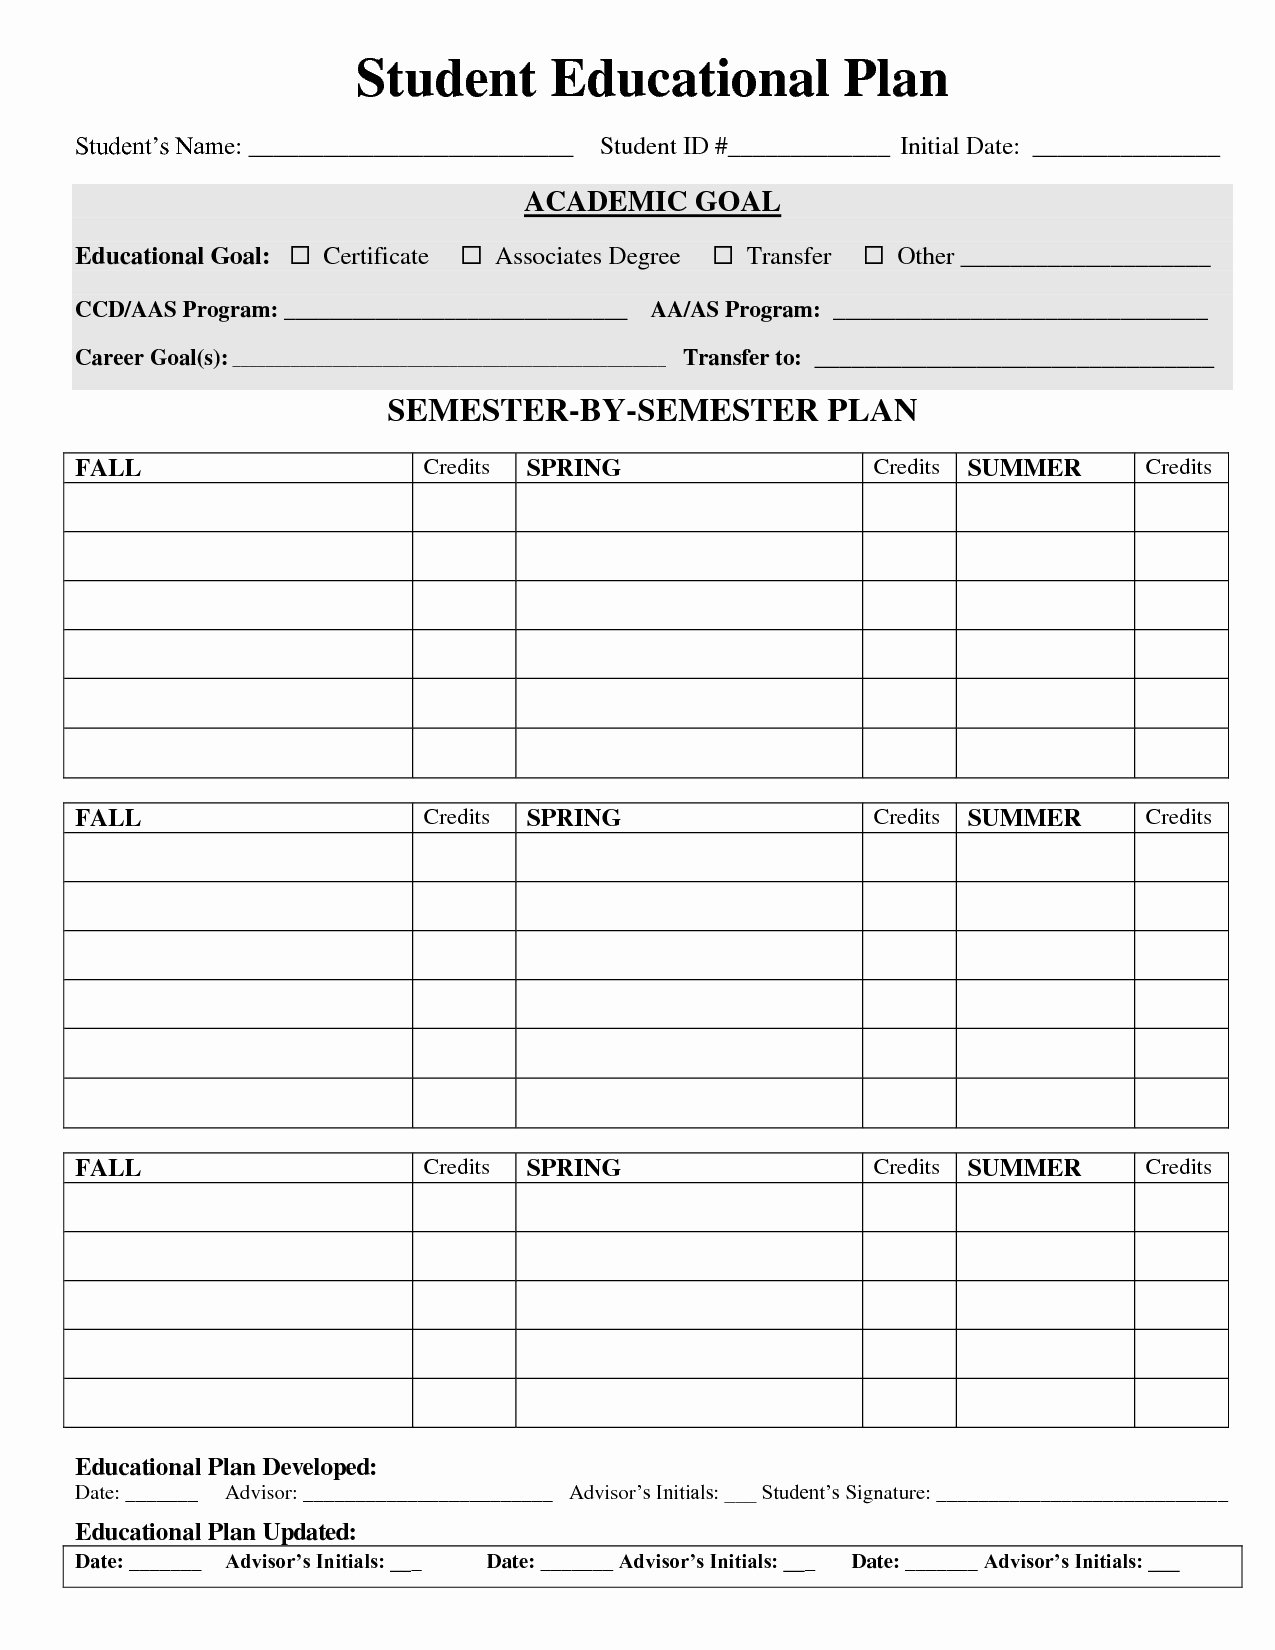 Study Plan Template for Students Beautiful Student Educational Plan Doc